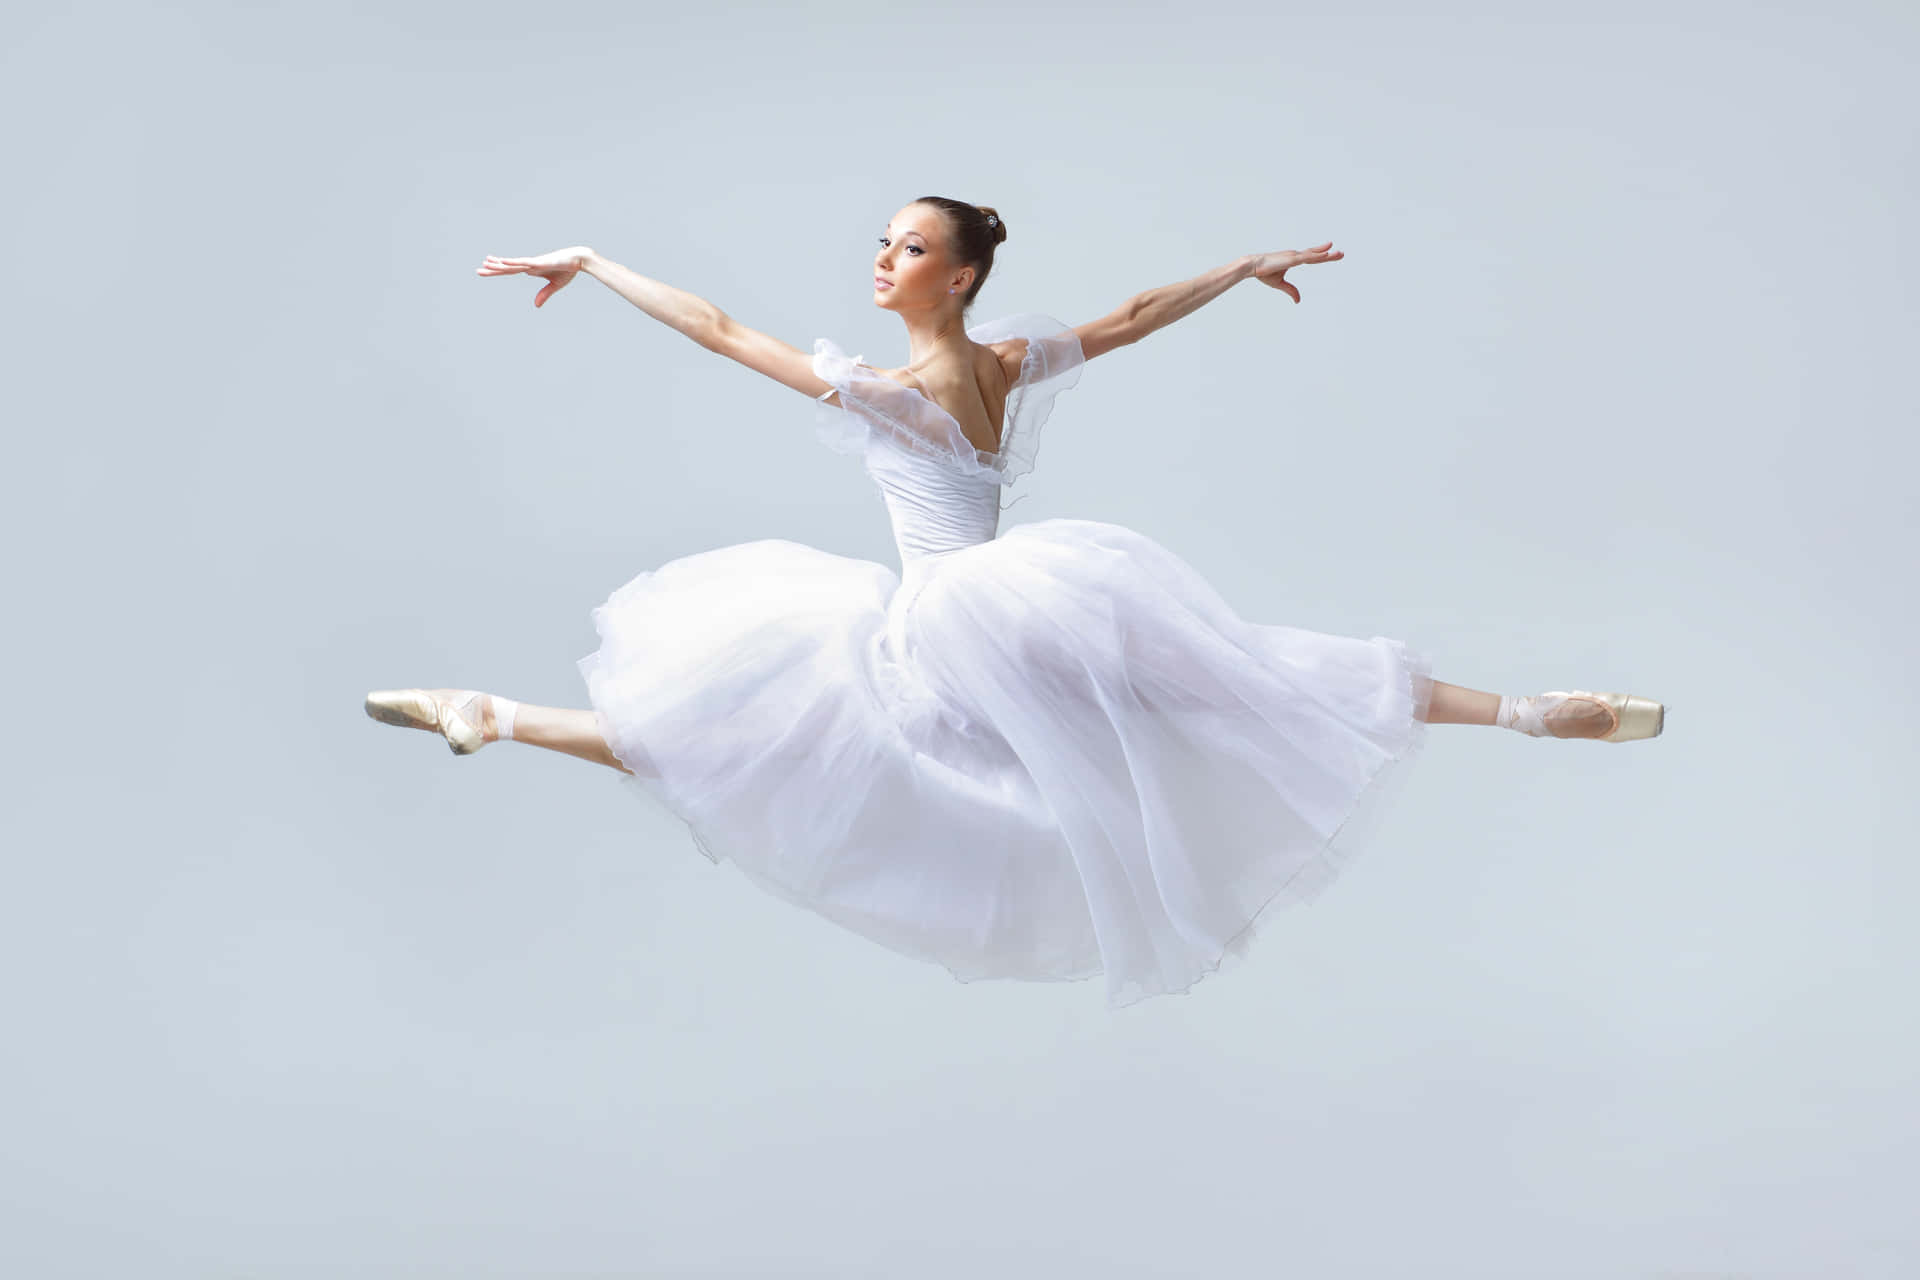 A Young Ballerina In White Dress Is Jumping